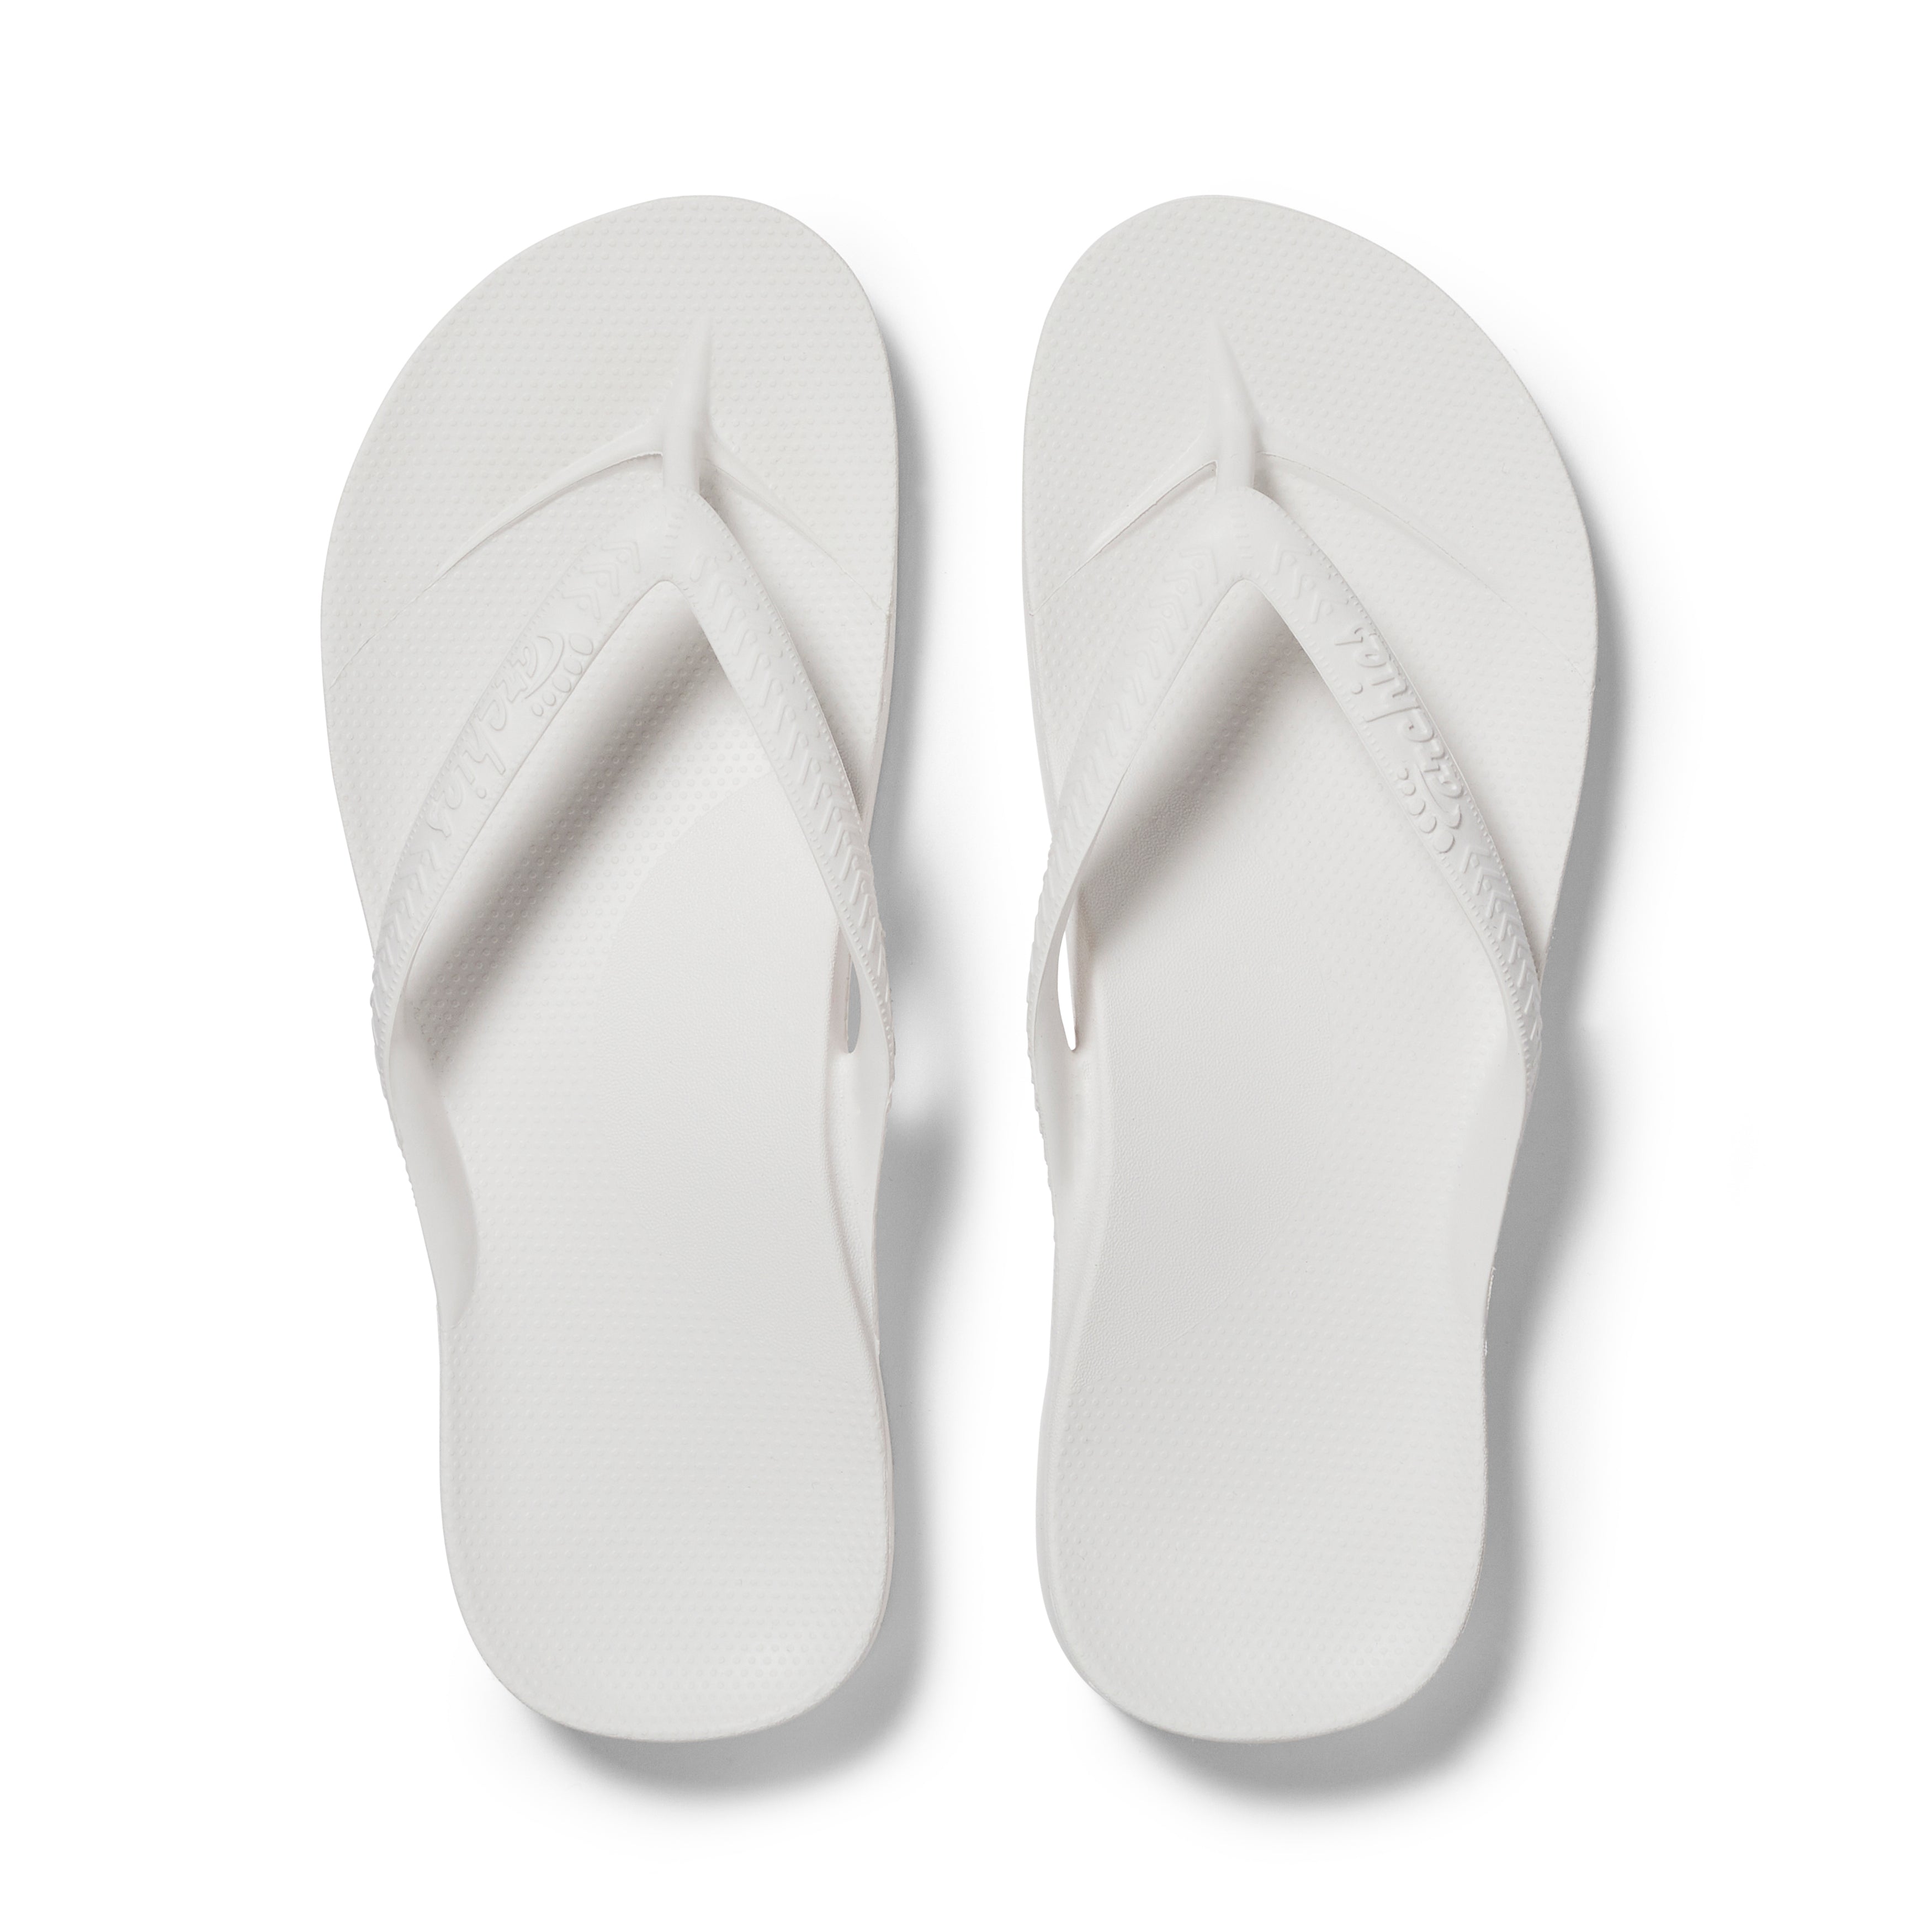 🩴 Archies Arch Support Taupe Flip Flops🩴